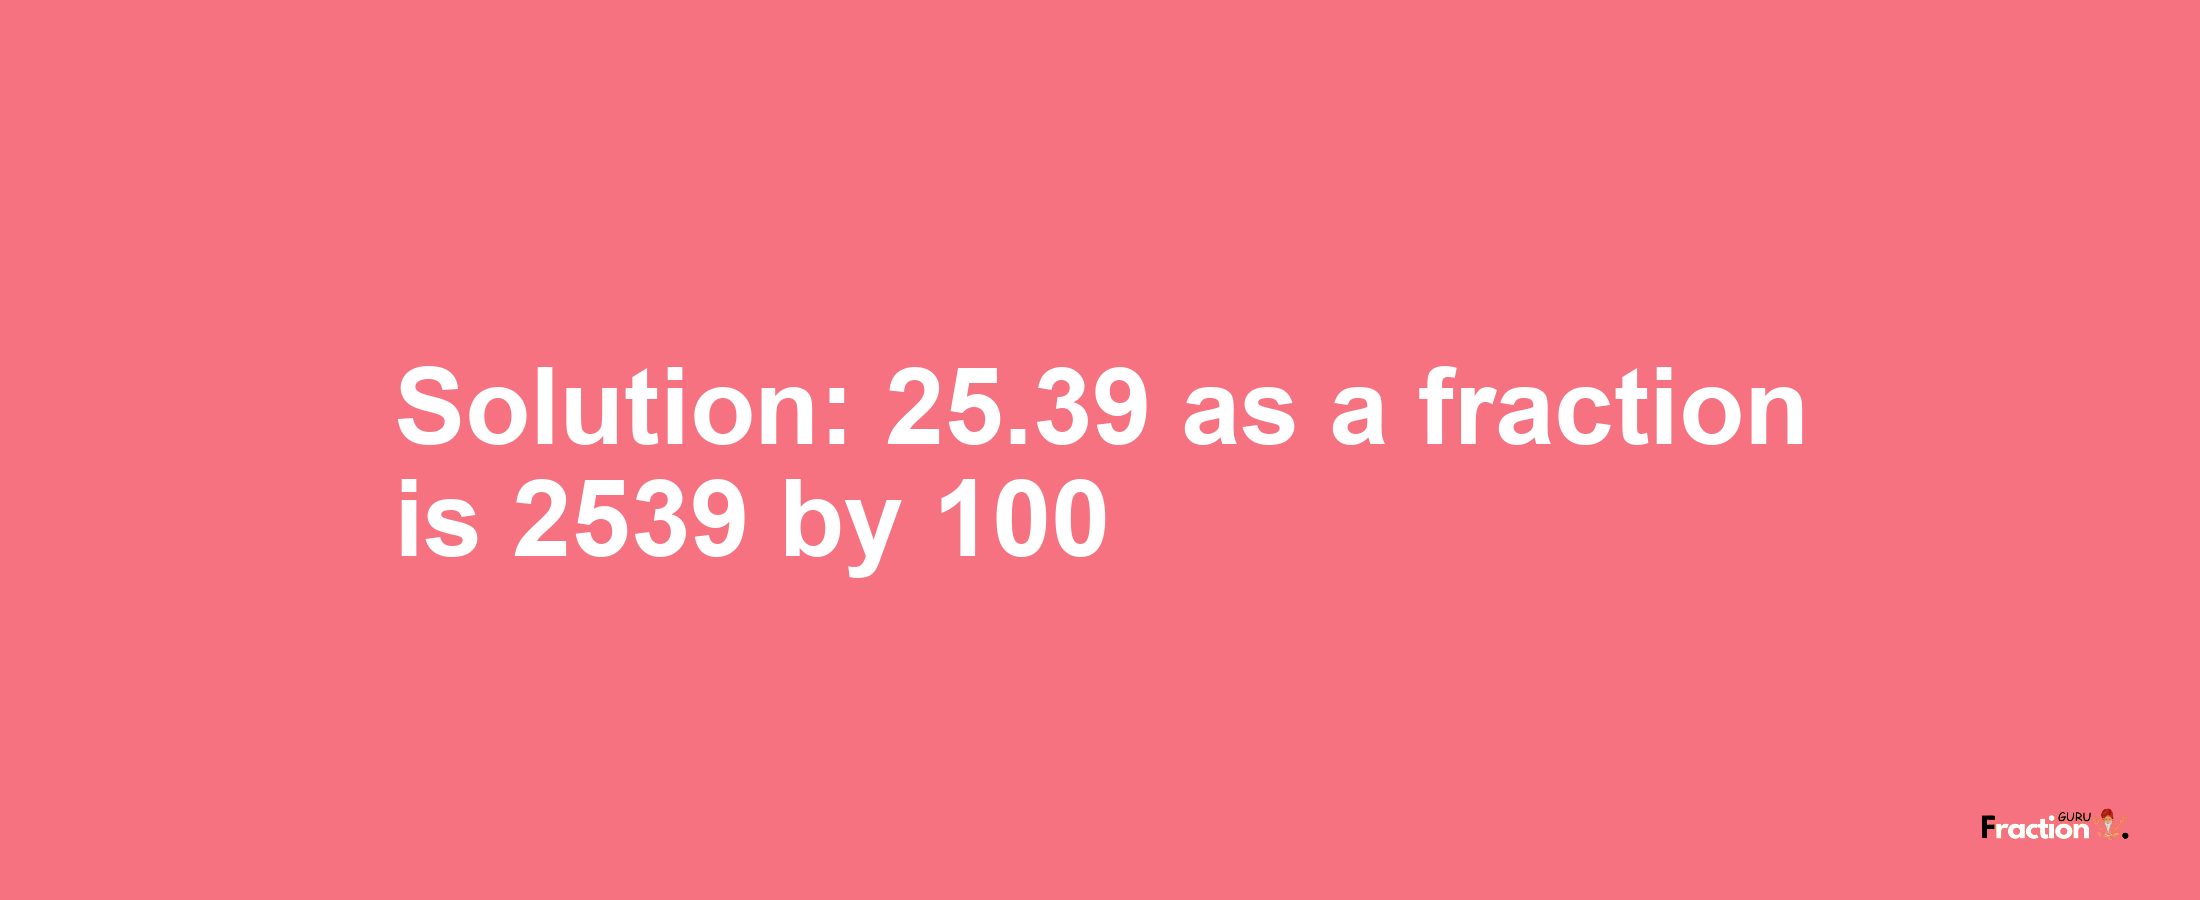 Solution:25.39 as a fraction is 2539/100